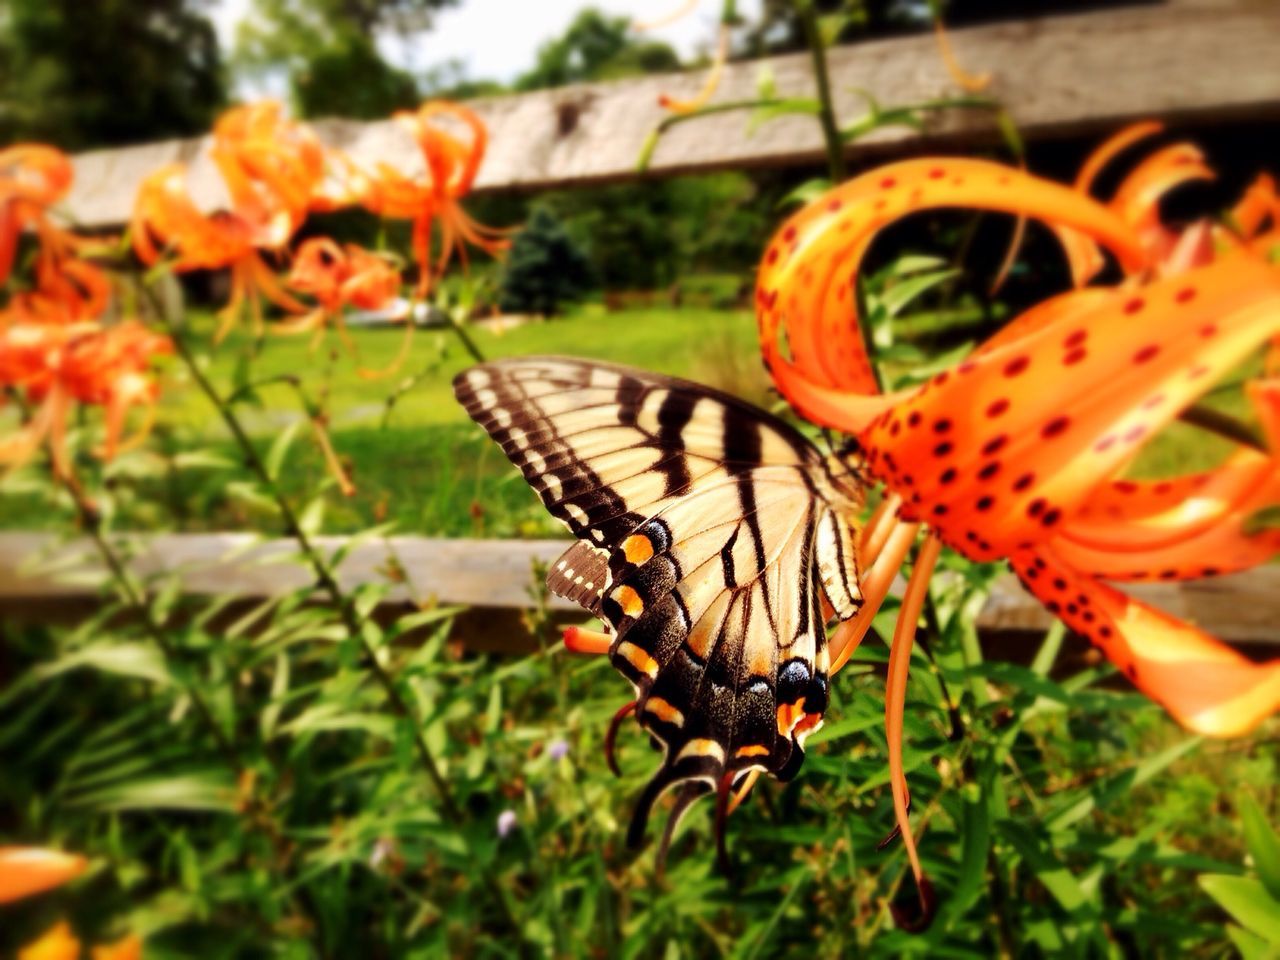 insect, animal themes, animals in the wild, focus on foreground, one animal, close-up, wildlife, butterfly - insect, plant, flower, orange color, nature, beauty in nature, selective focus, animal markings, freshness, growth, outdoors, butterfly, day